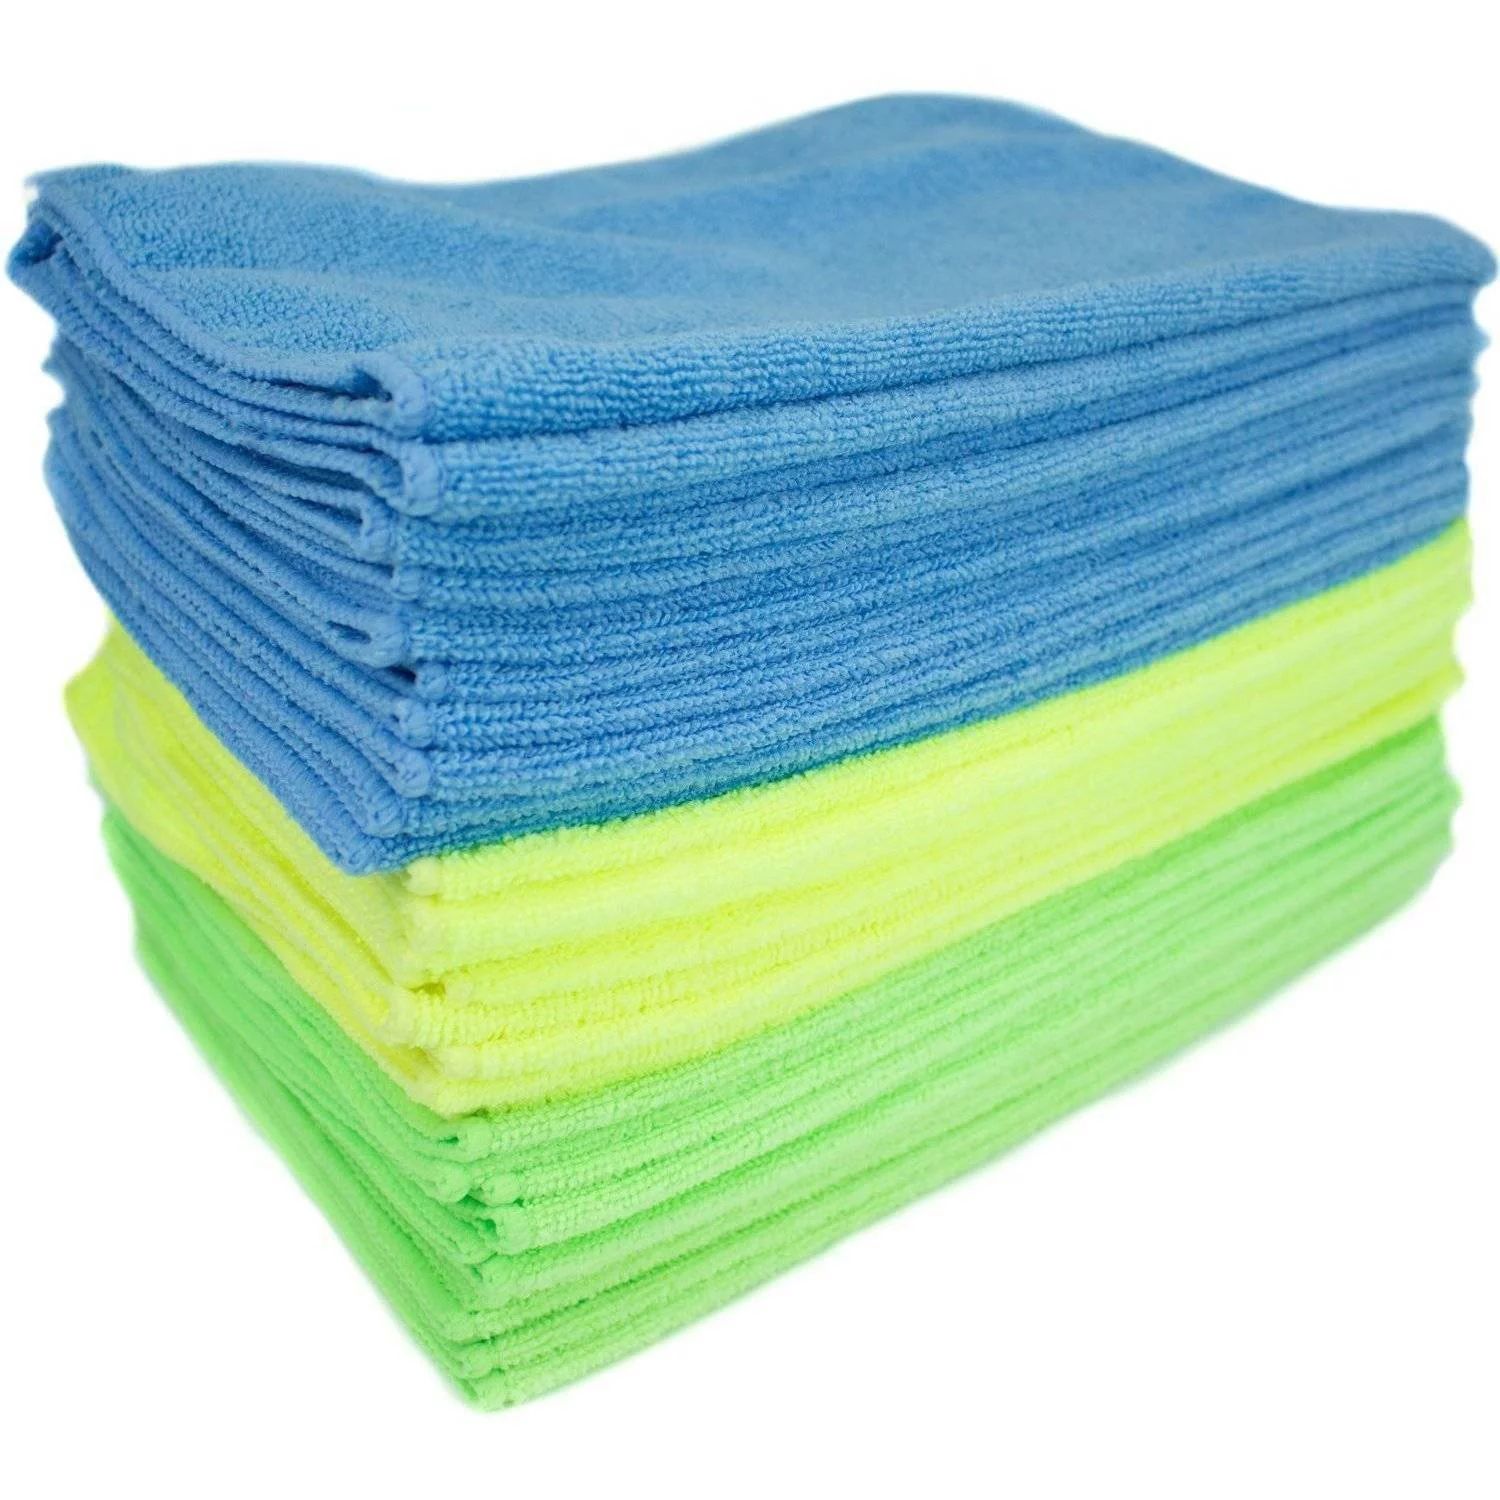 Zwipes Microfiber Cleaning Cloths, Multicolor, 12-Pack | Walmart (US)